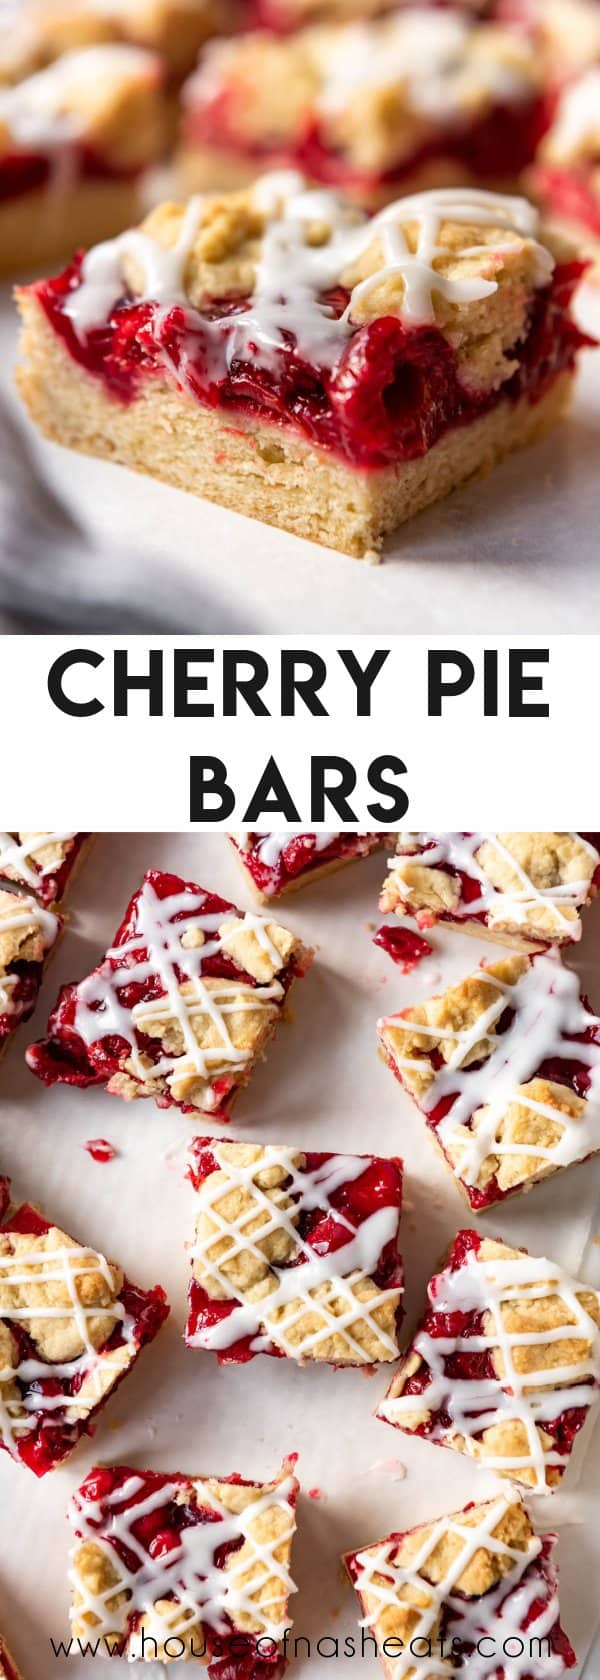 A collage of images of cherry pie bars with text overlay.